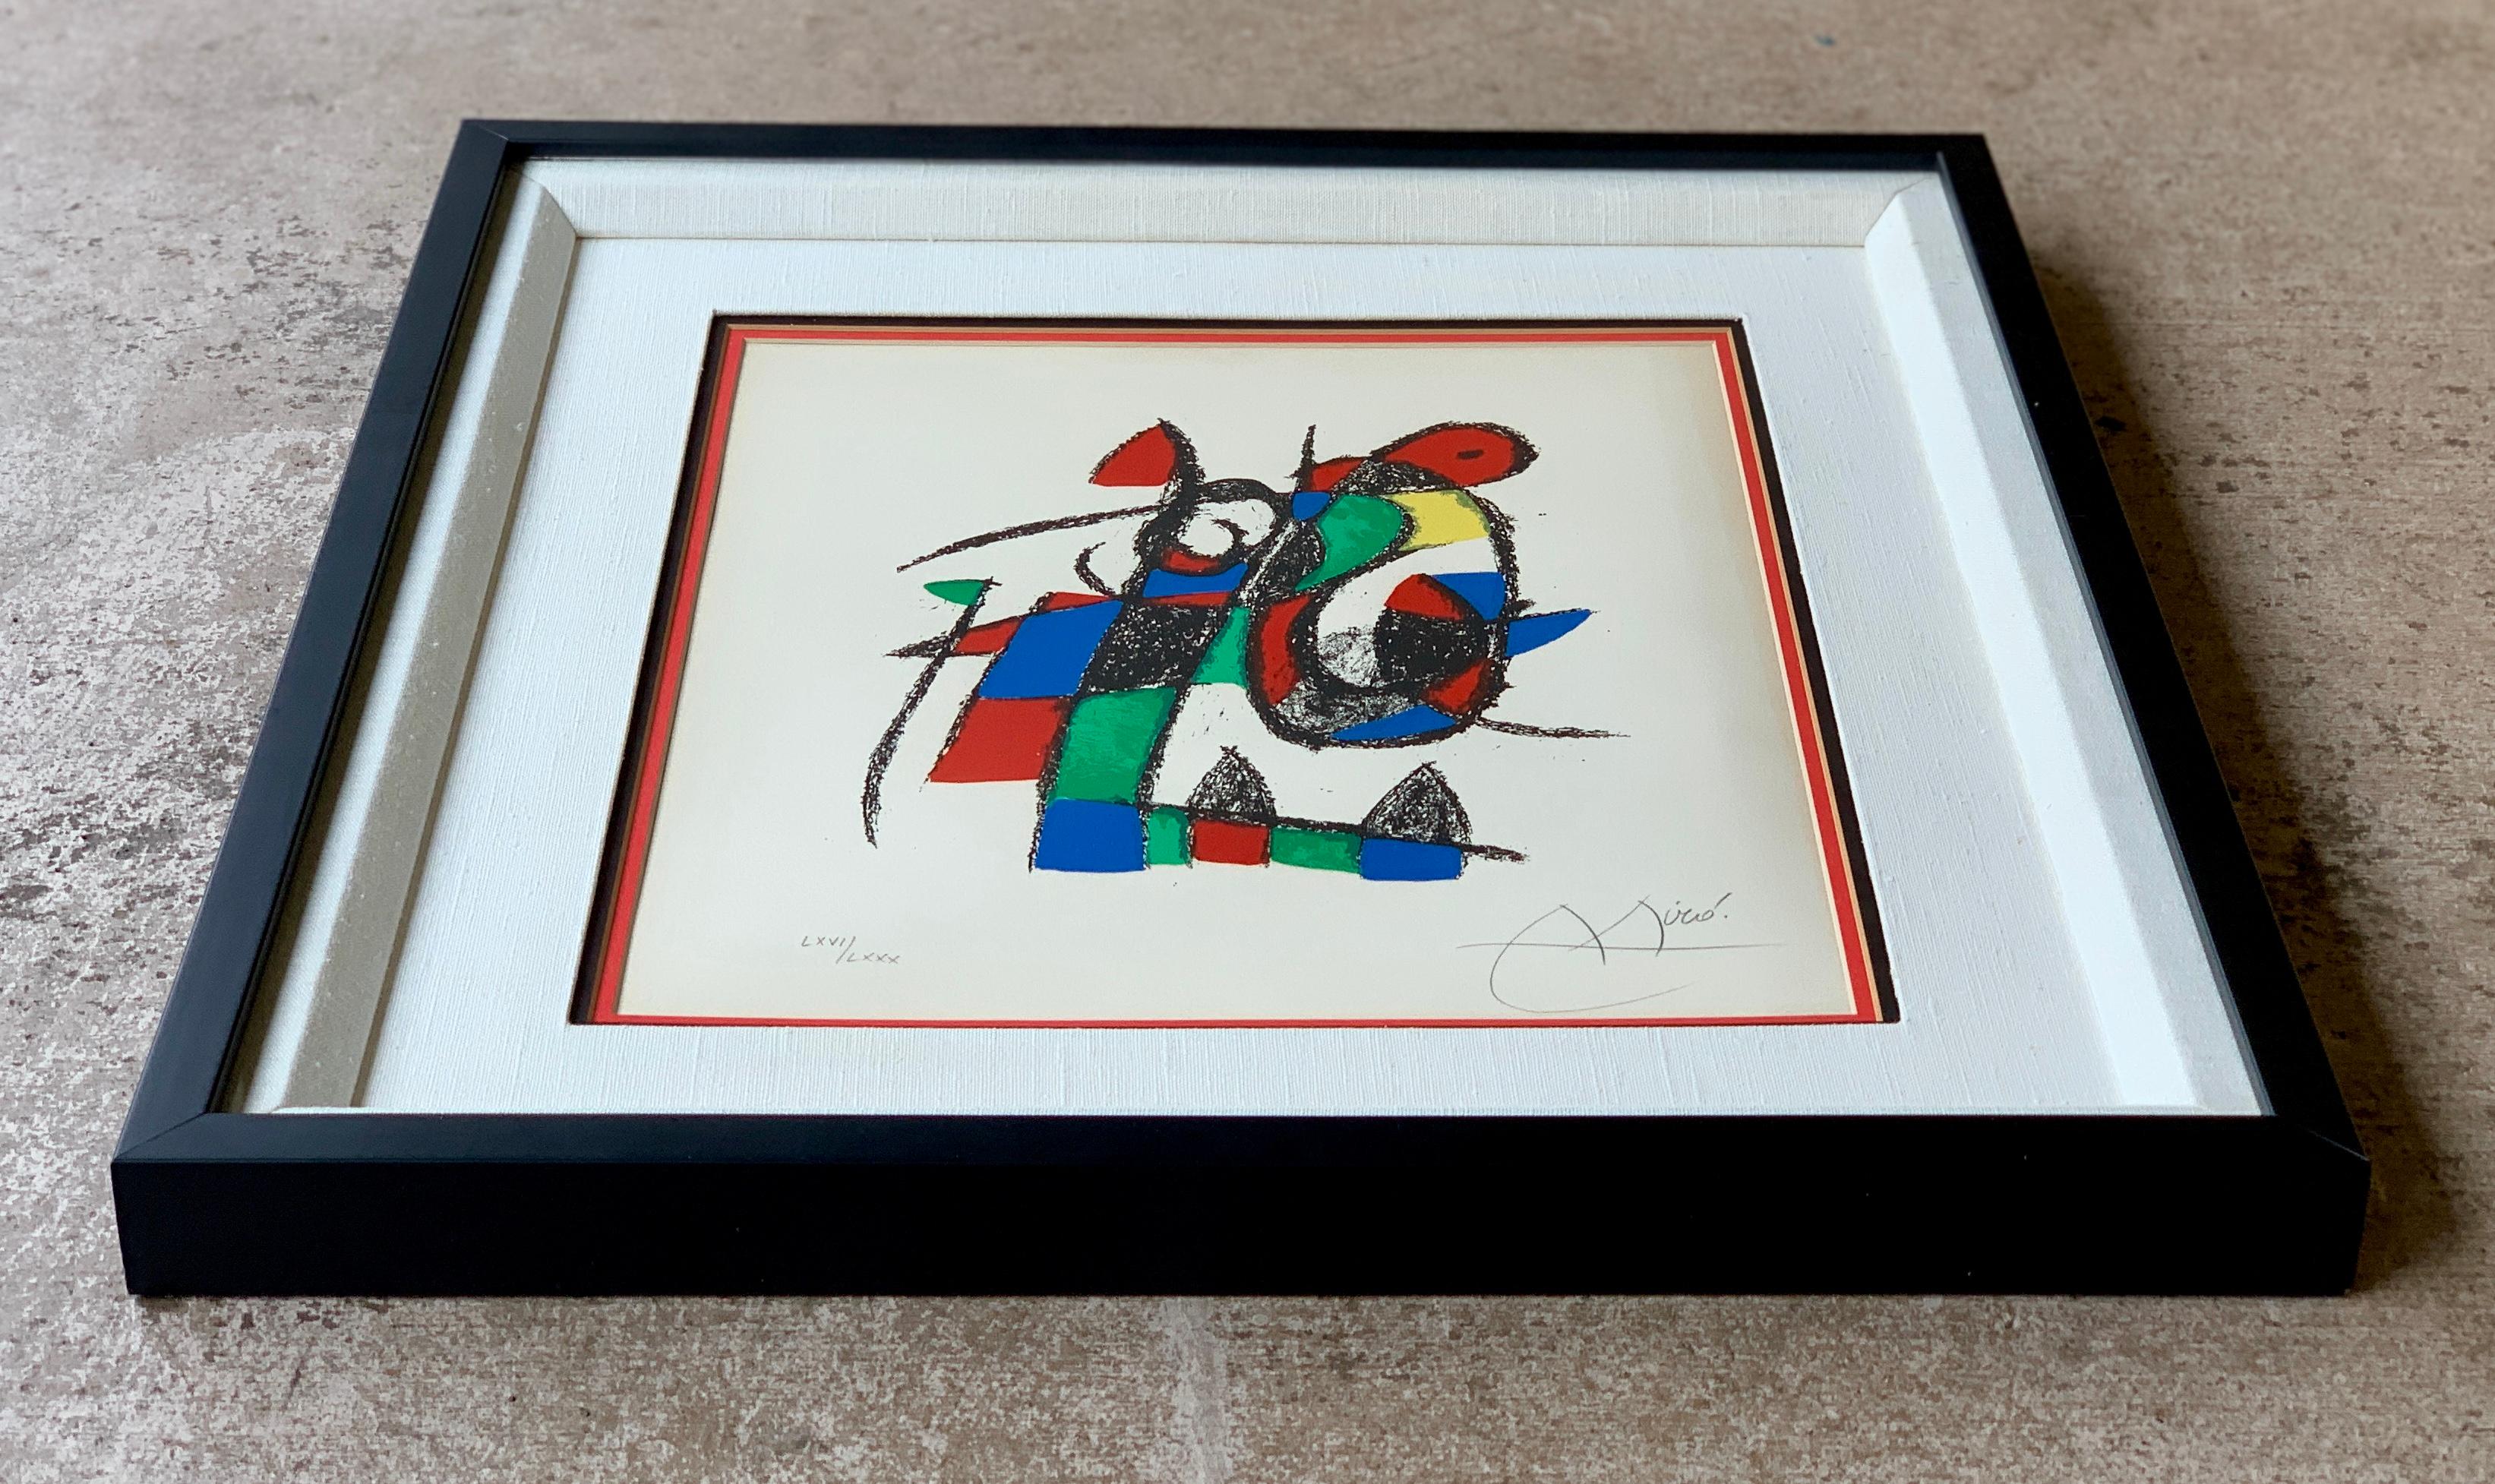 French Signed Joan Miro Abstract Limited Edition Lithograph from 